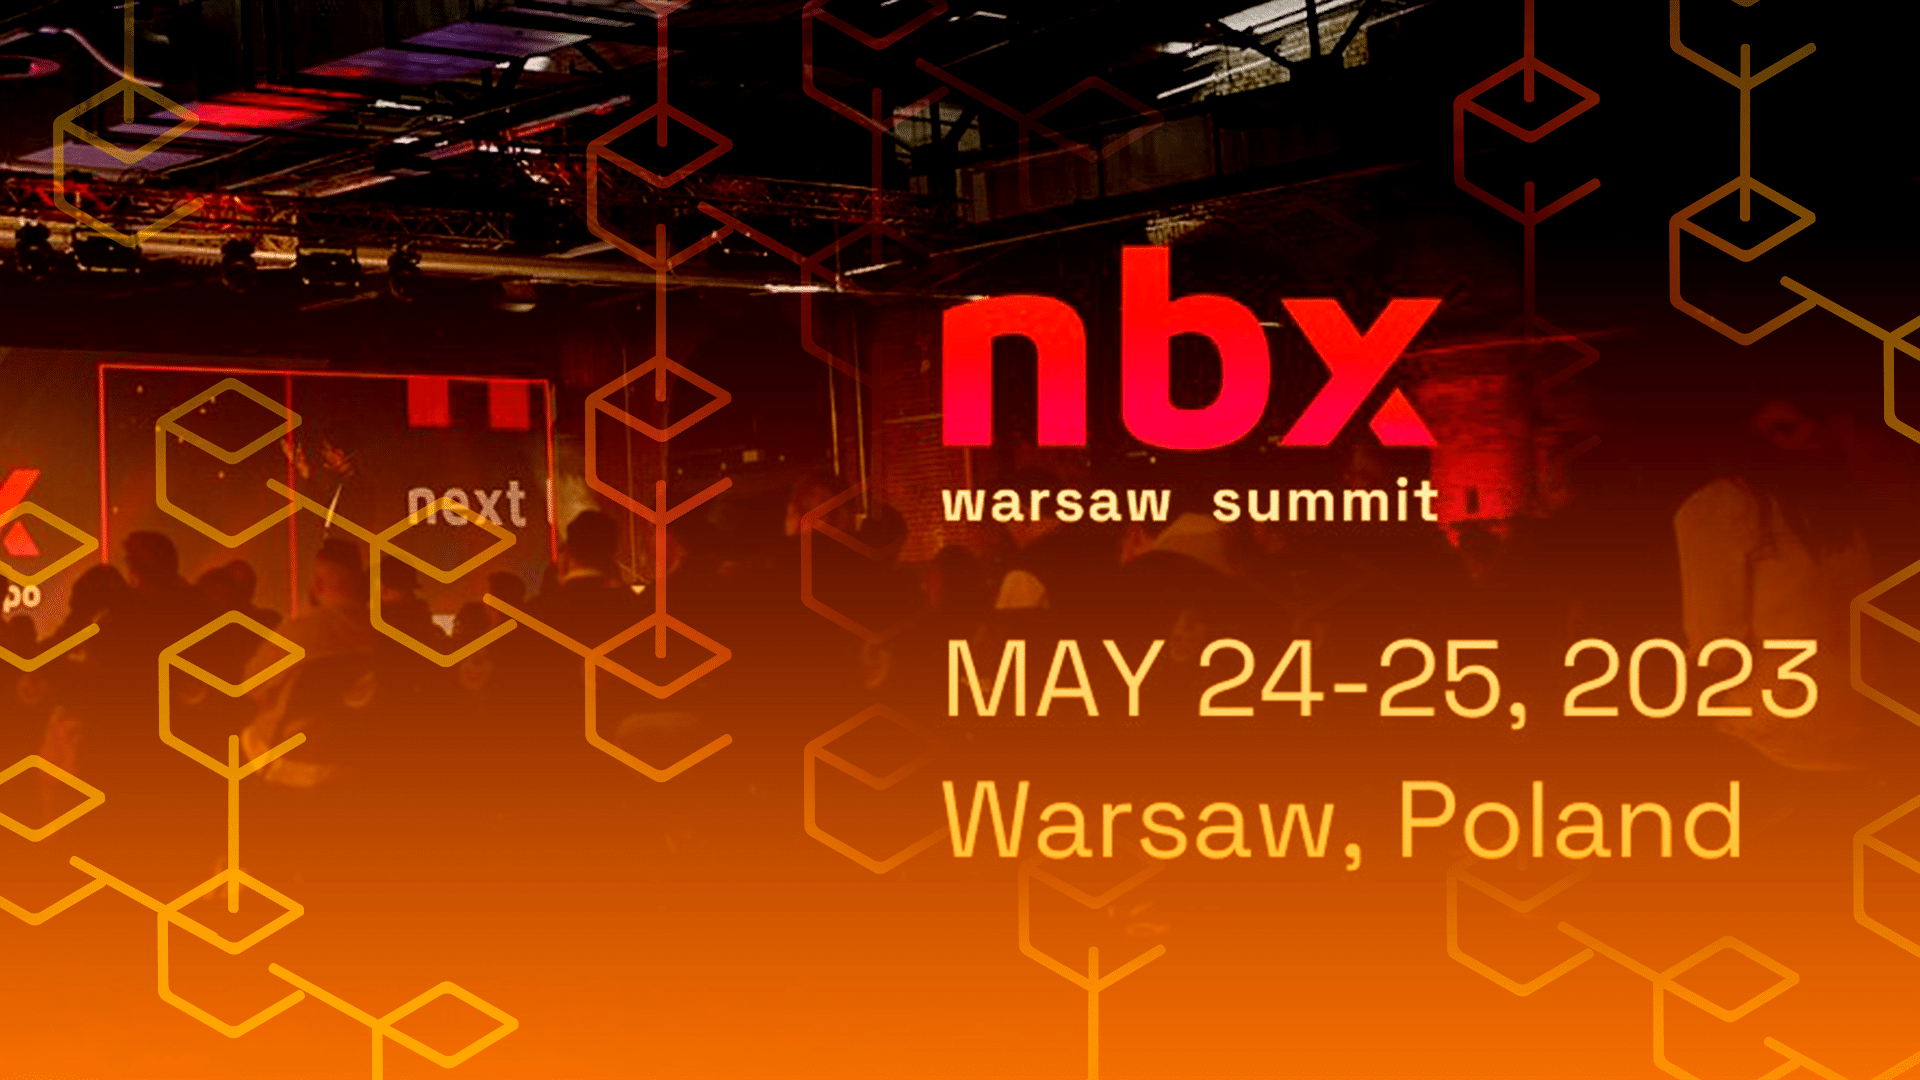 Next Block Expo Warsaw Summit 2023 - an Unmissable European Networking Event